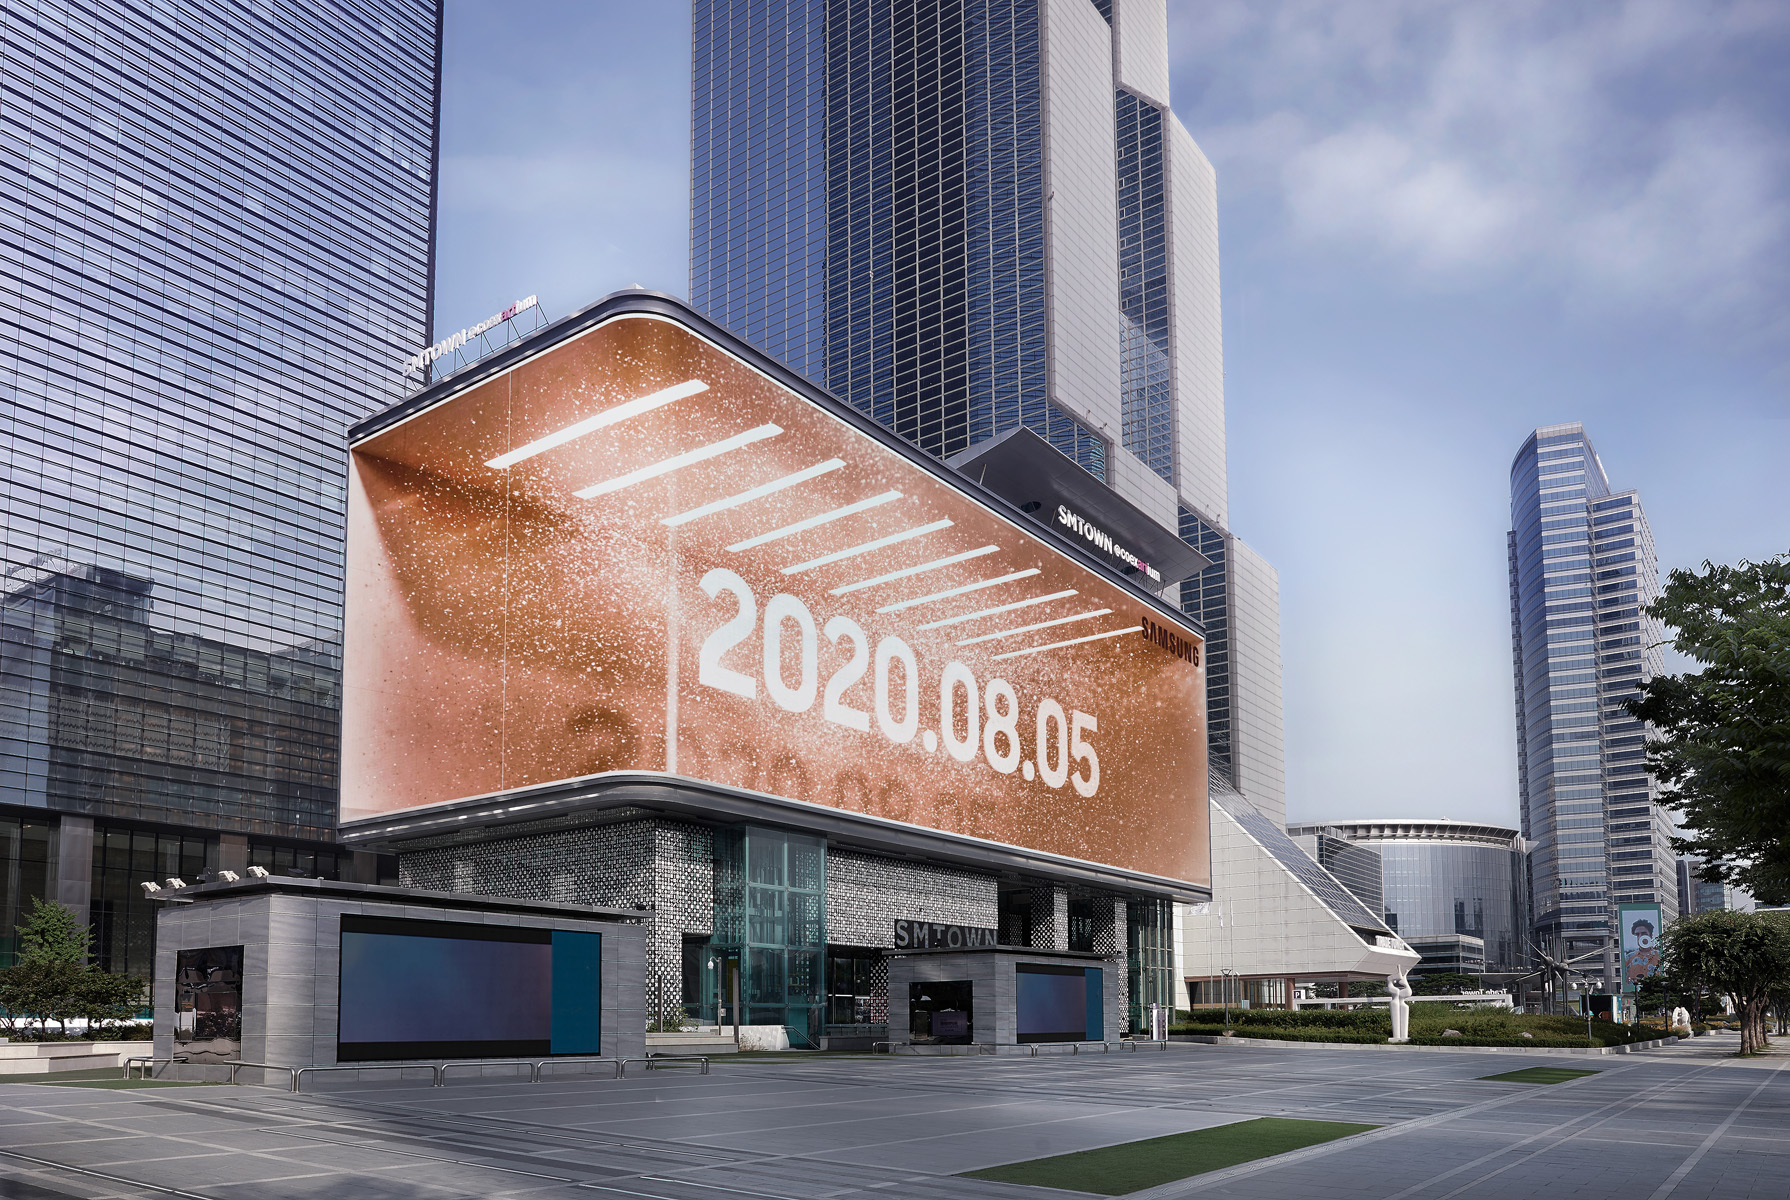 Large digital display with bronze backdrop and white letters spelling out the date August 5, 2020